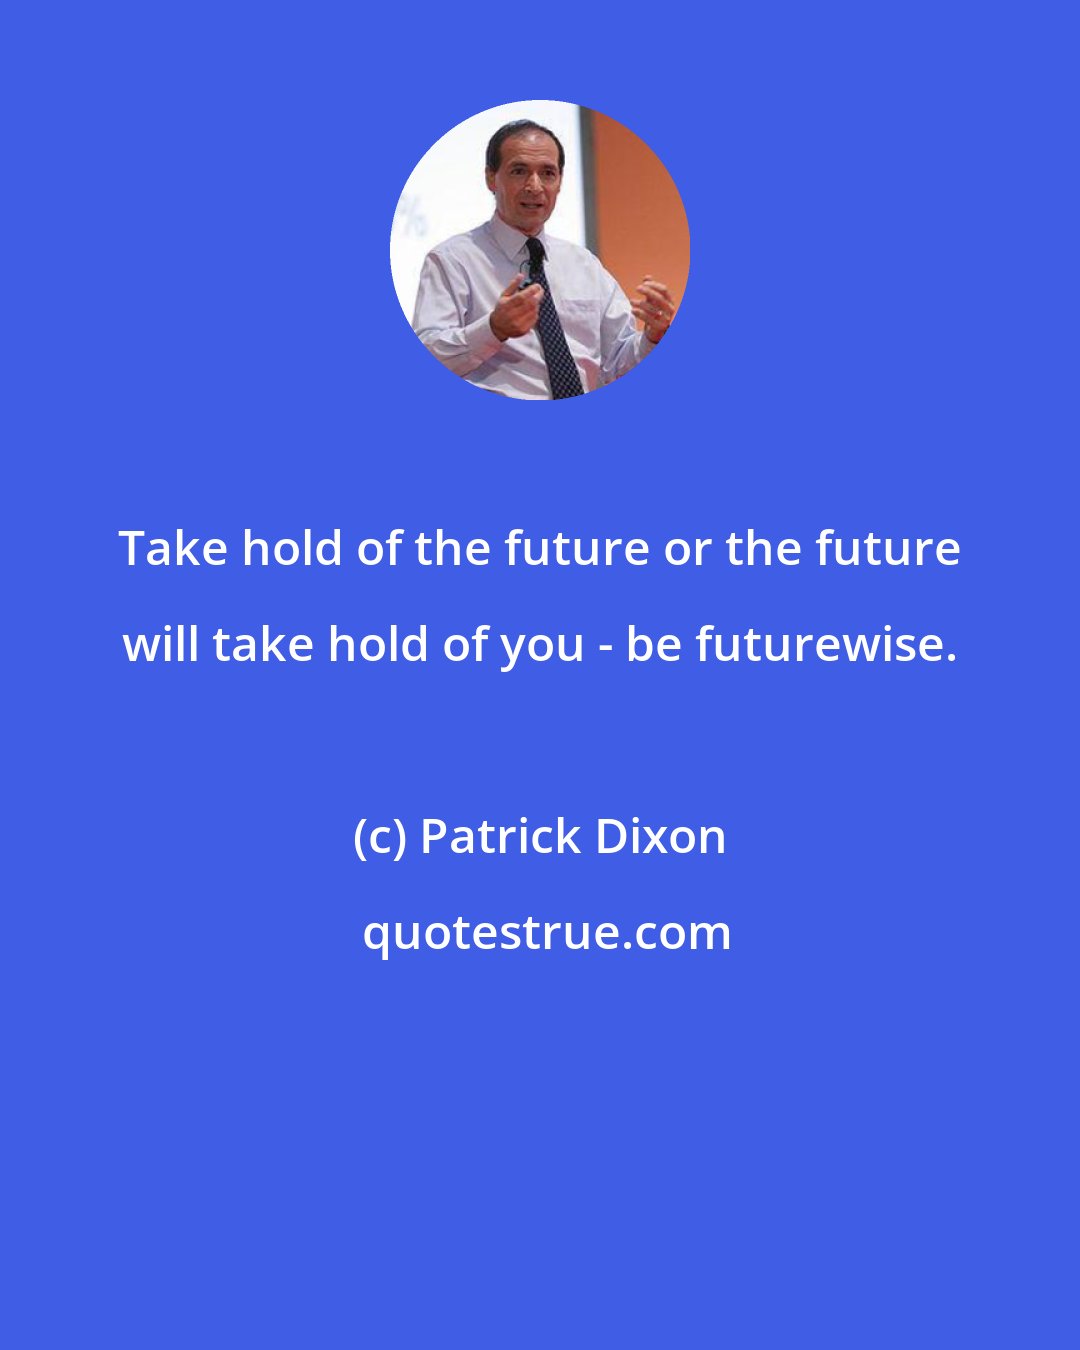 Patrick Dixon: Take hold of the future or the future will take hold of you - be futurewise.